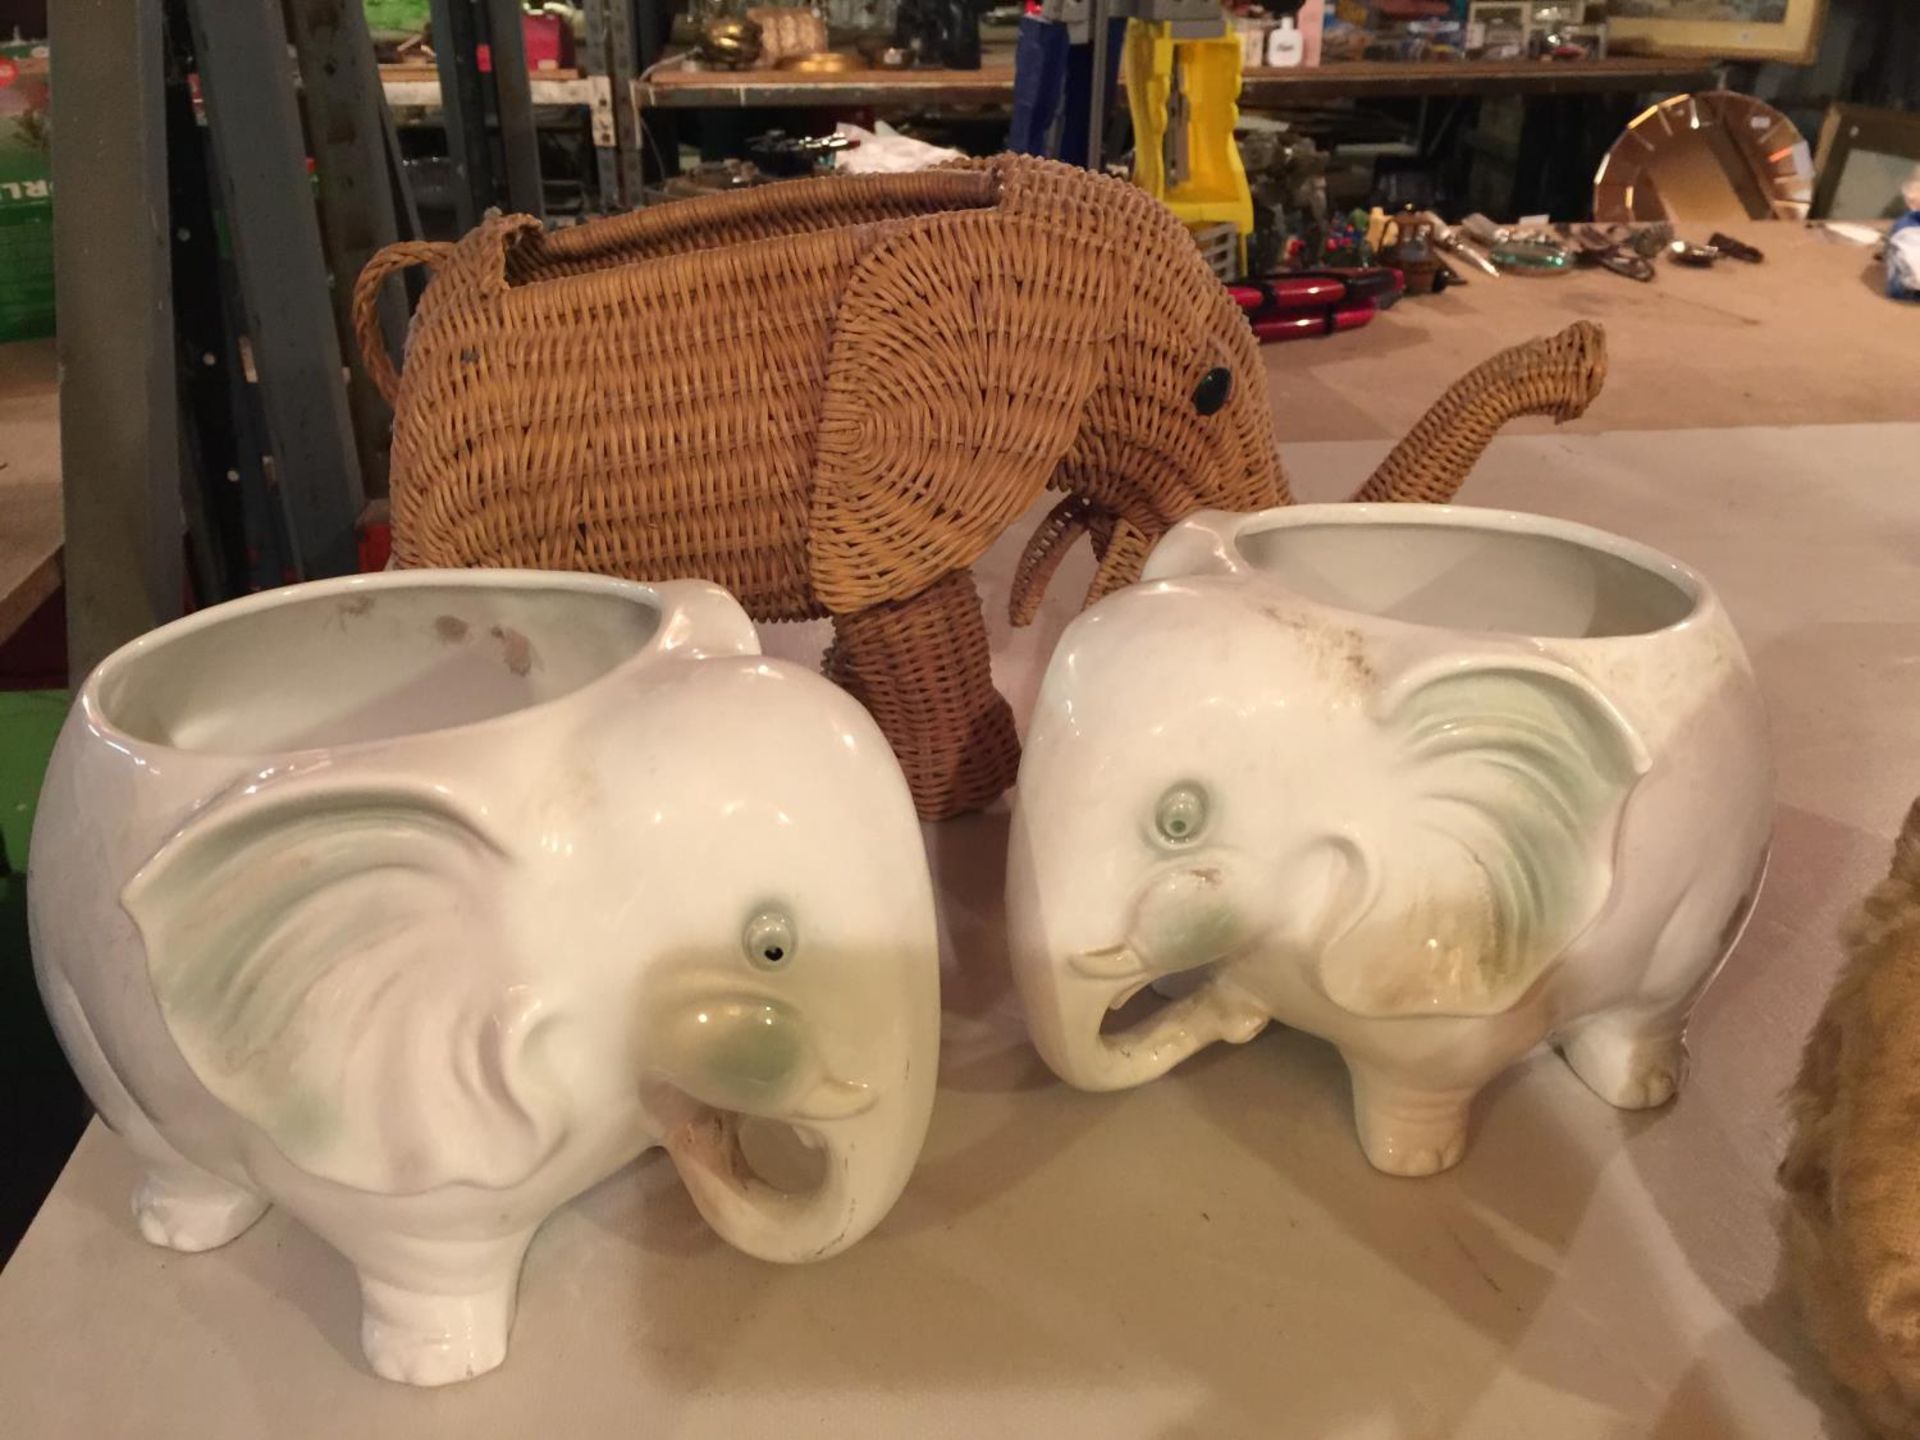 THREE ELEPHANT PLANTERS TI INCLUDE A PAIR OF CERAMIC AND A WICKER